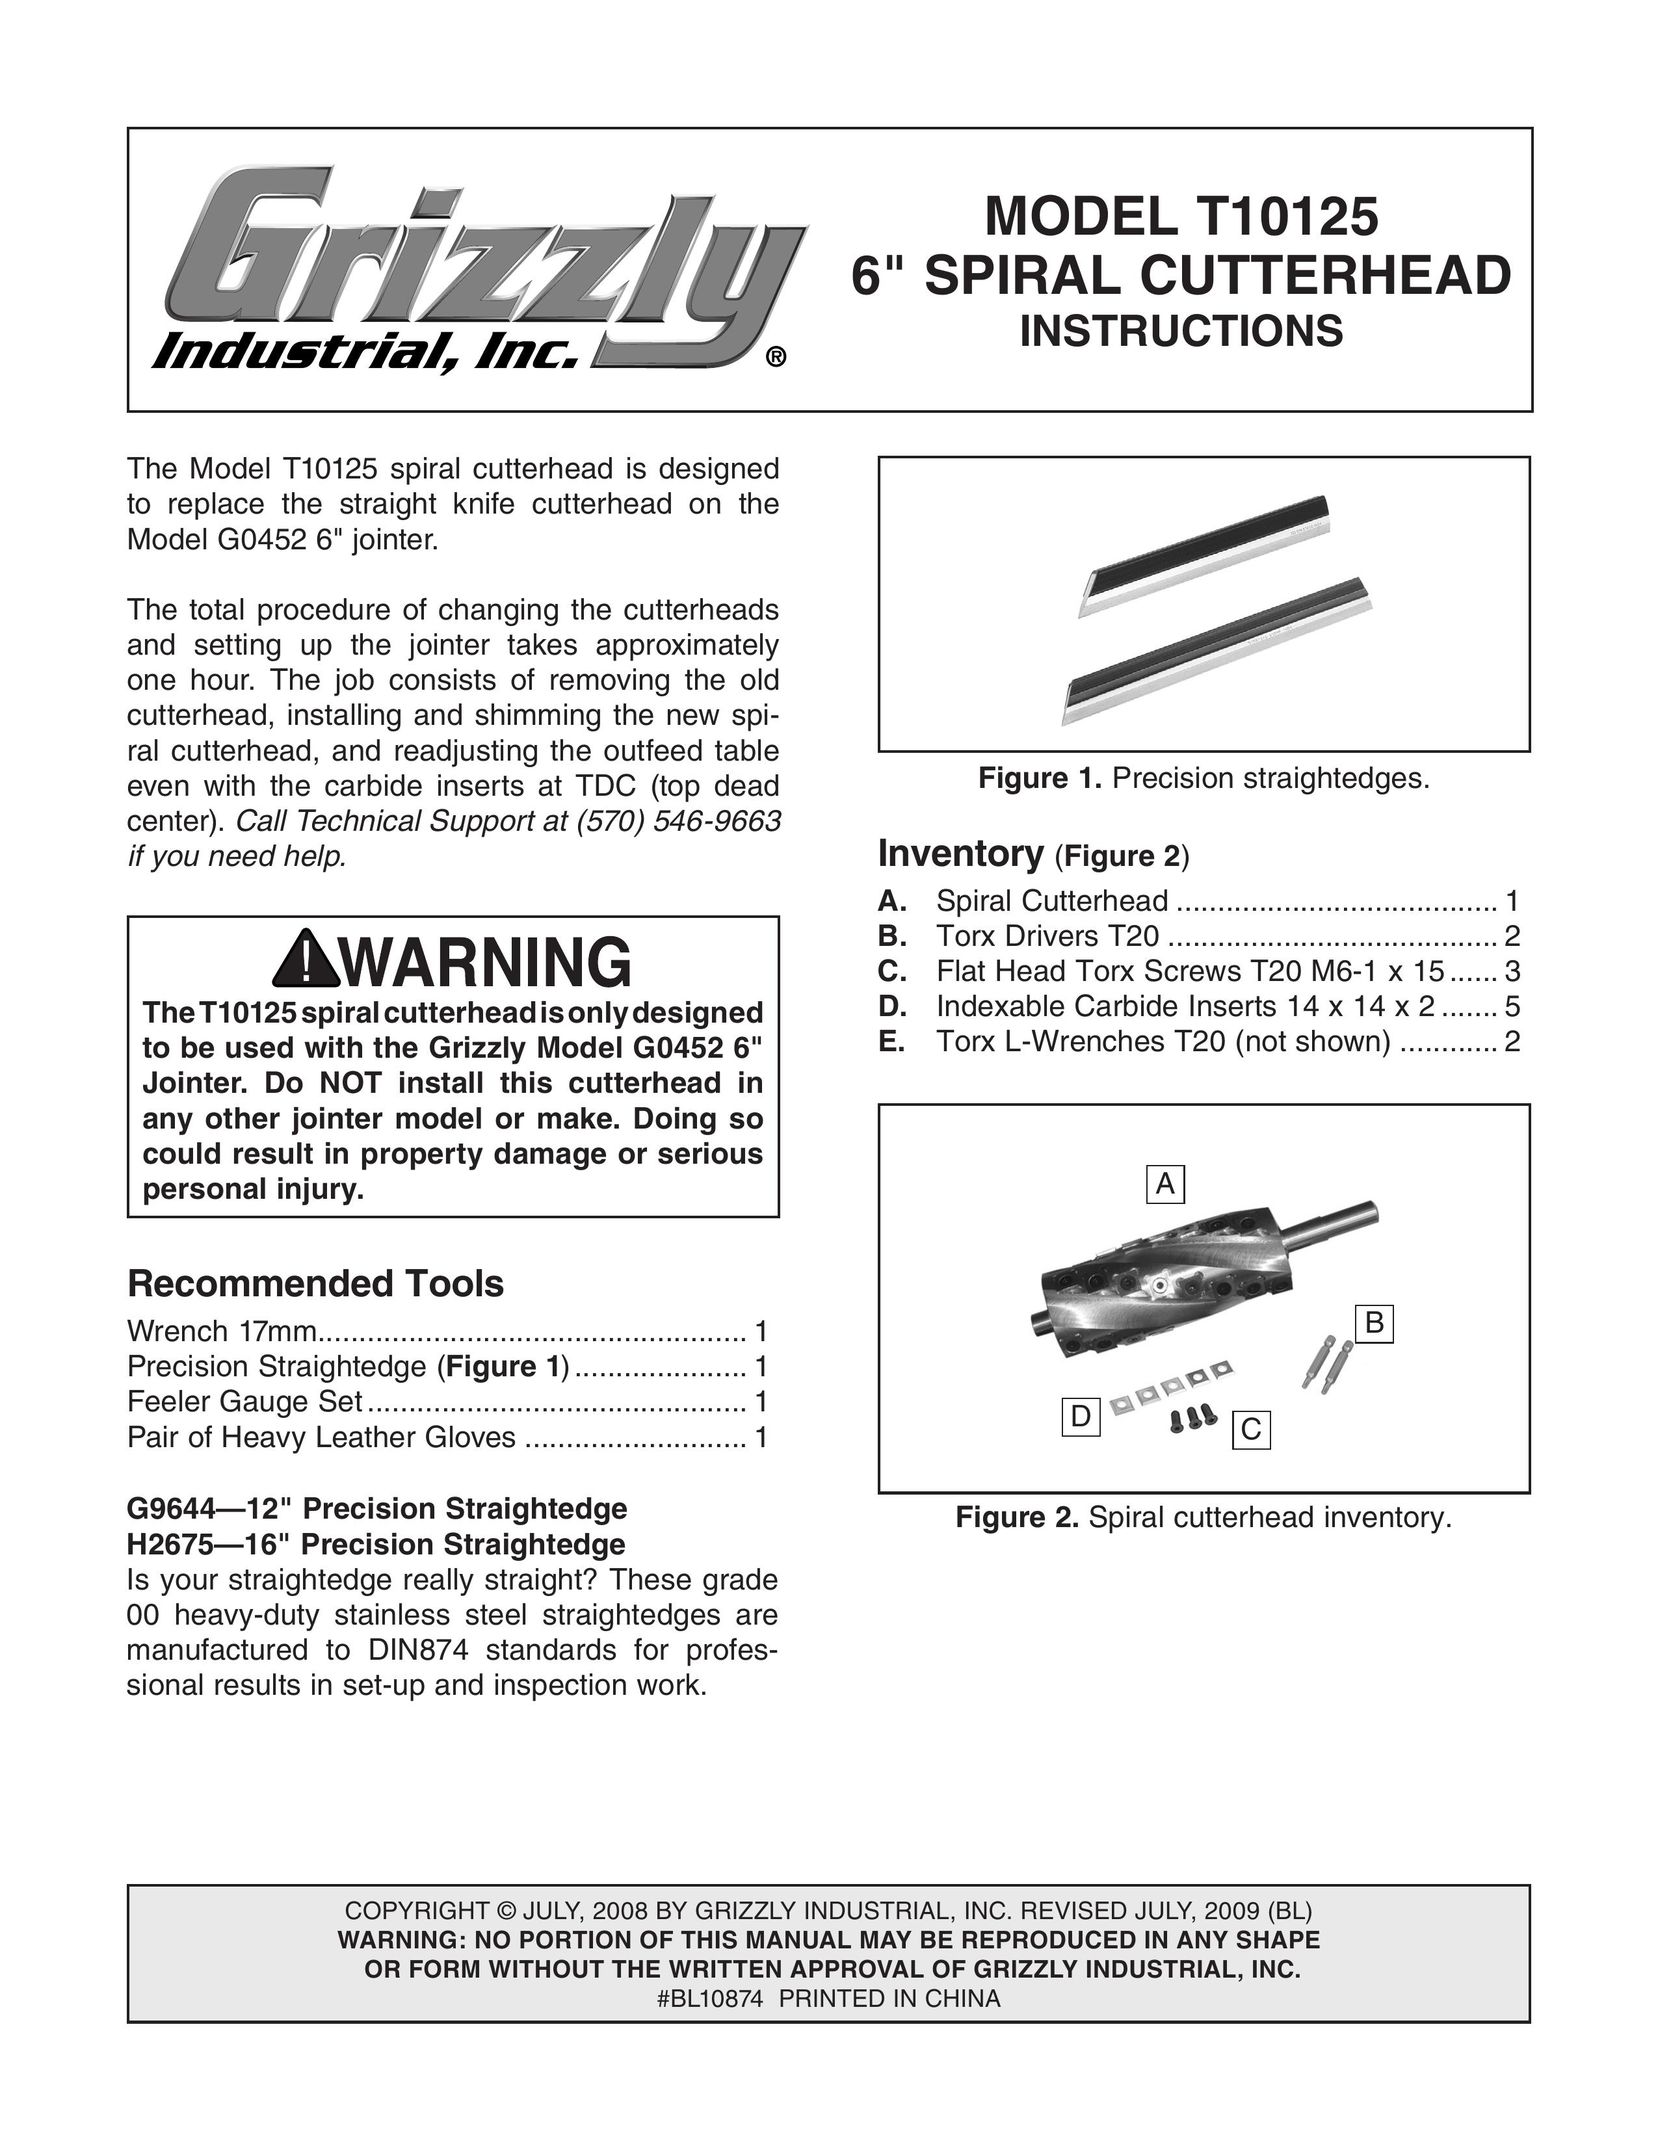 Grizzly T10125 Kitchen Utensil User Manual